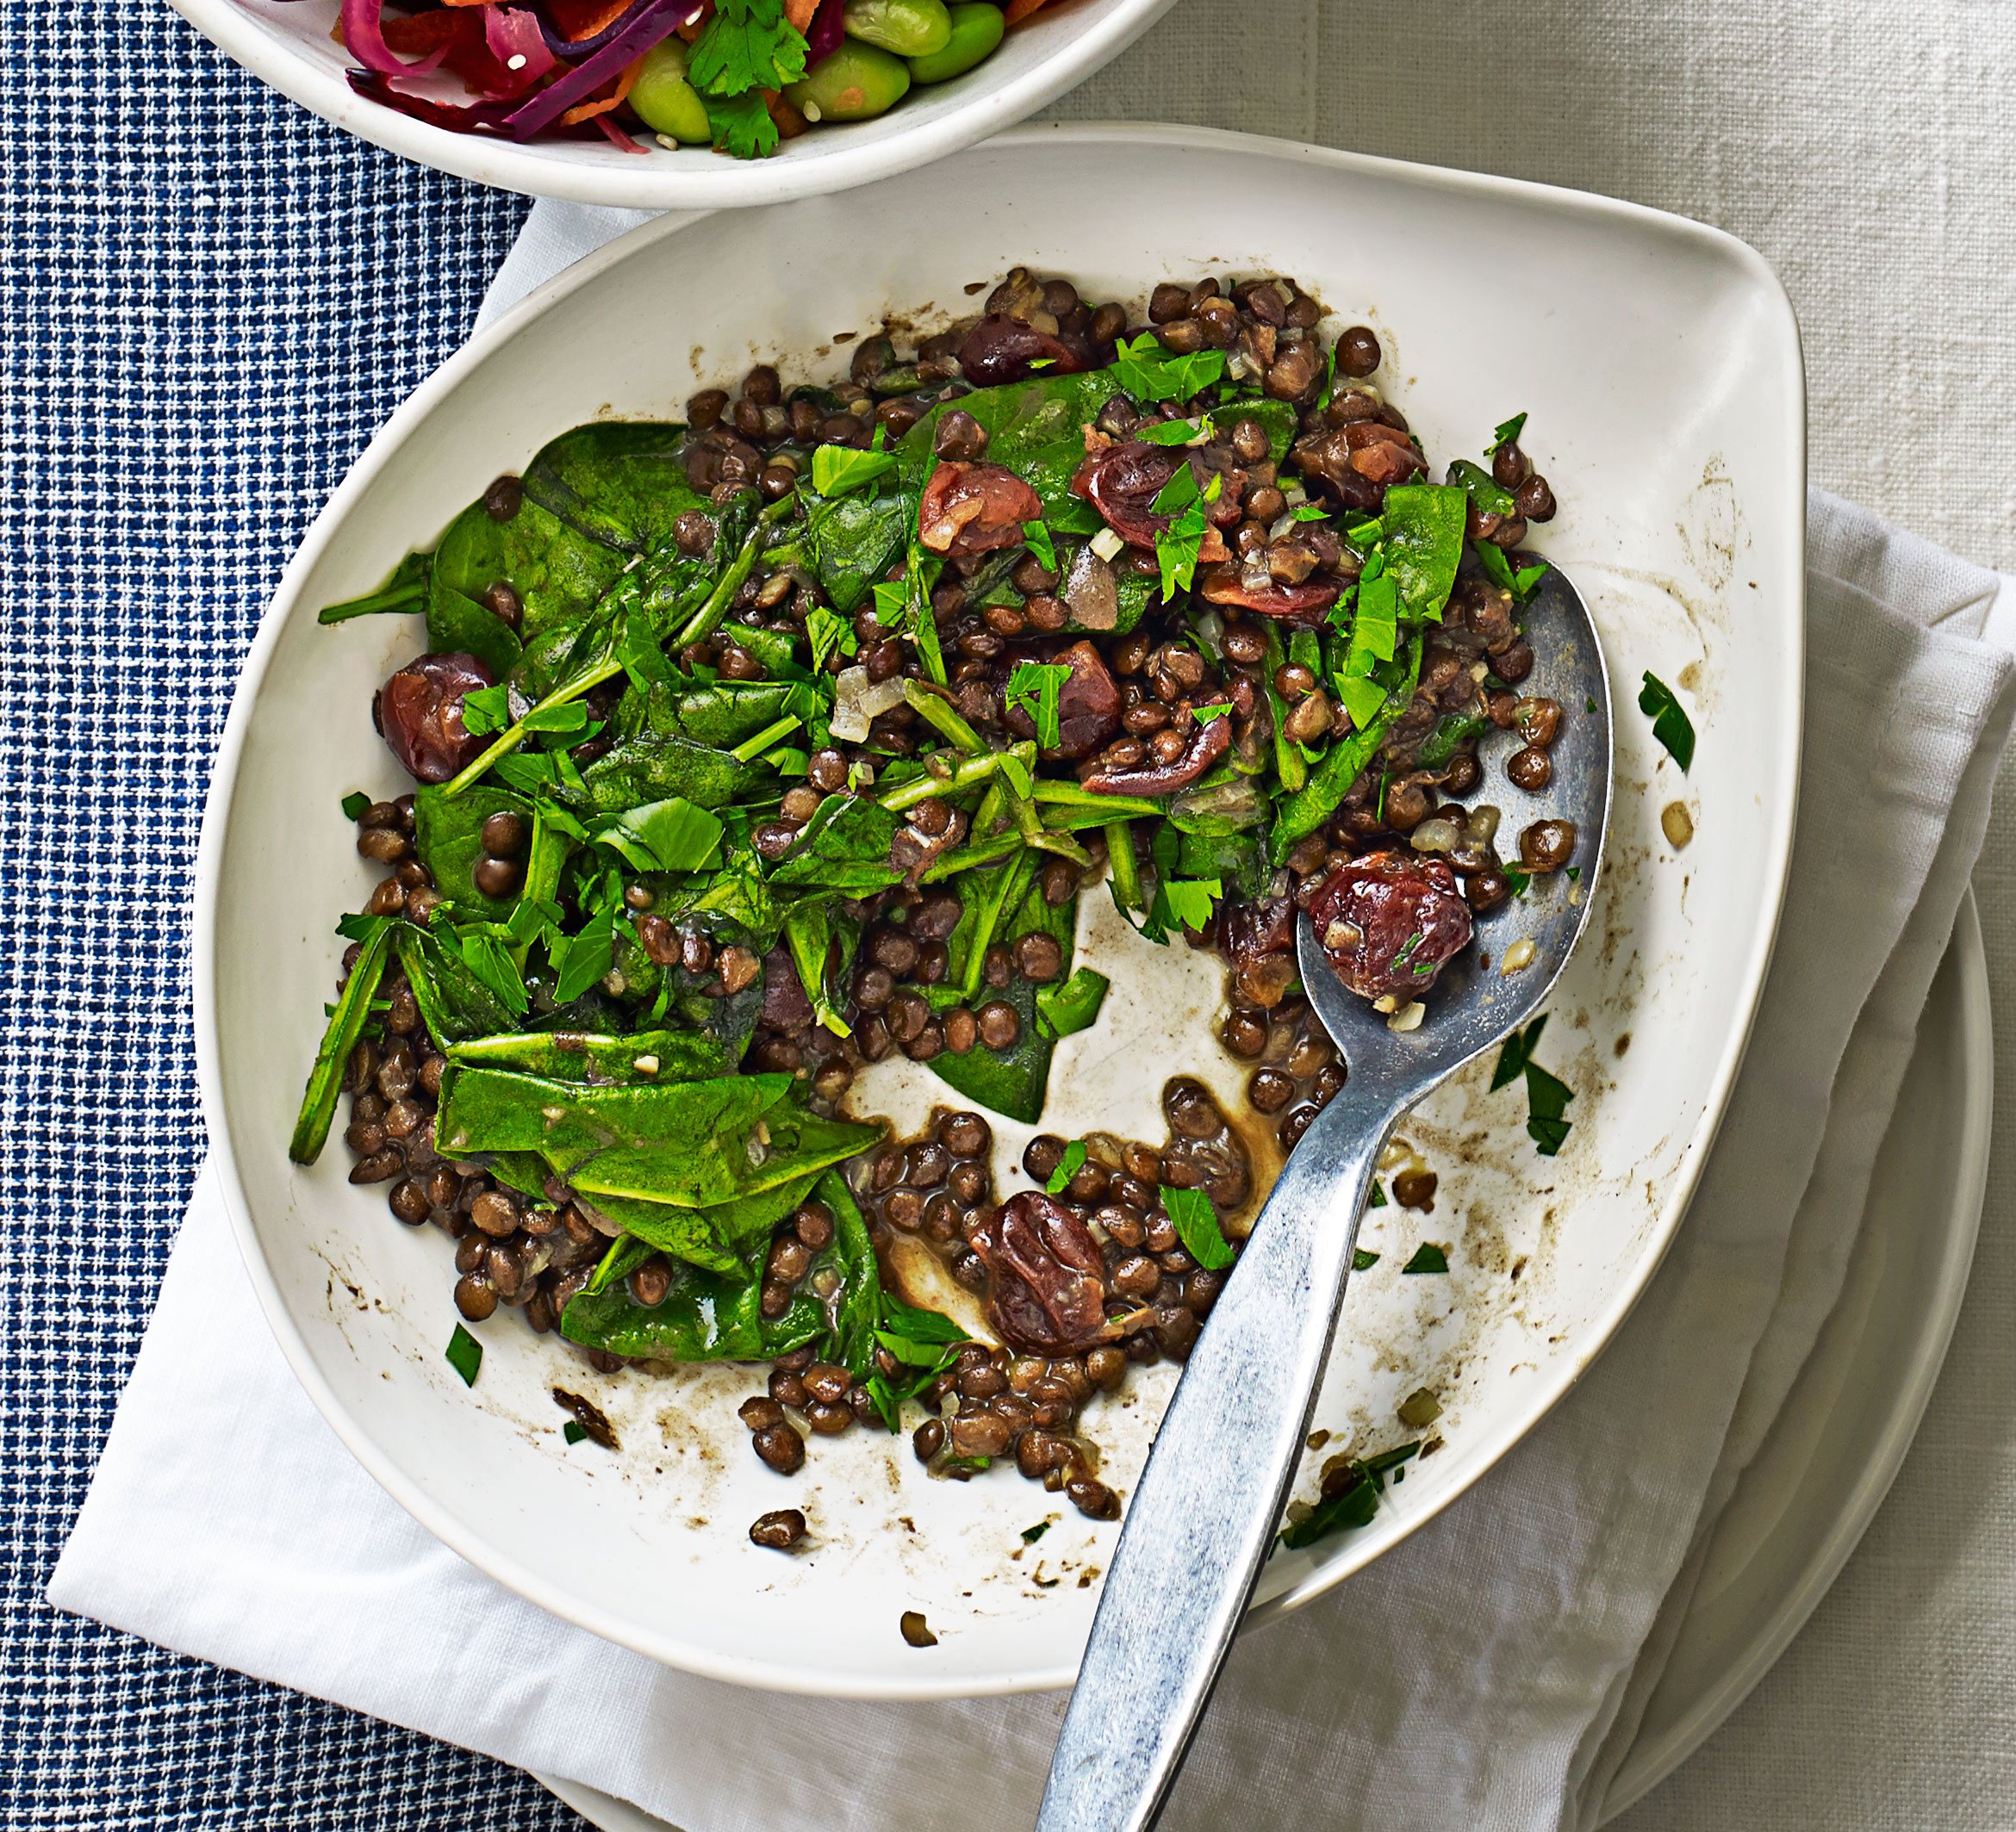 Puy lentils with spinach & sour cherries